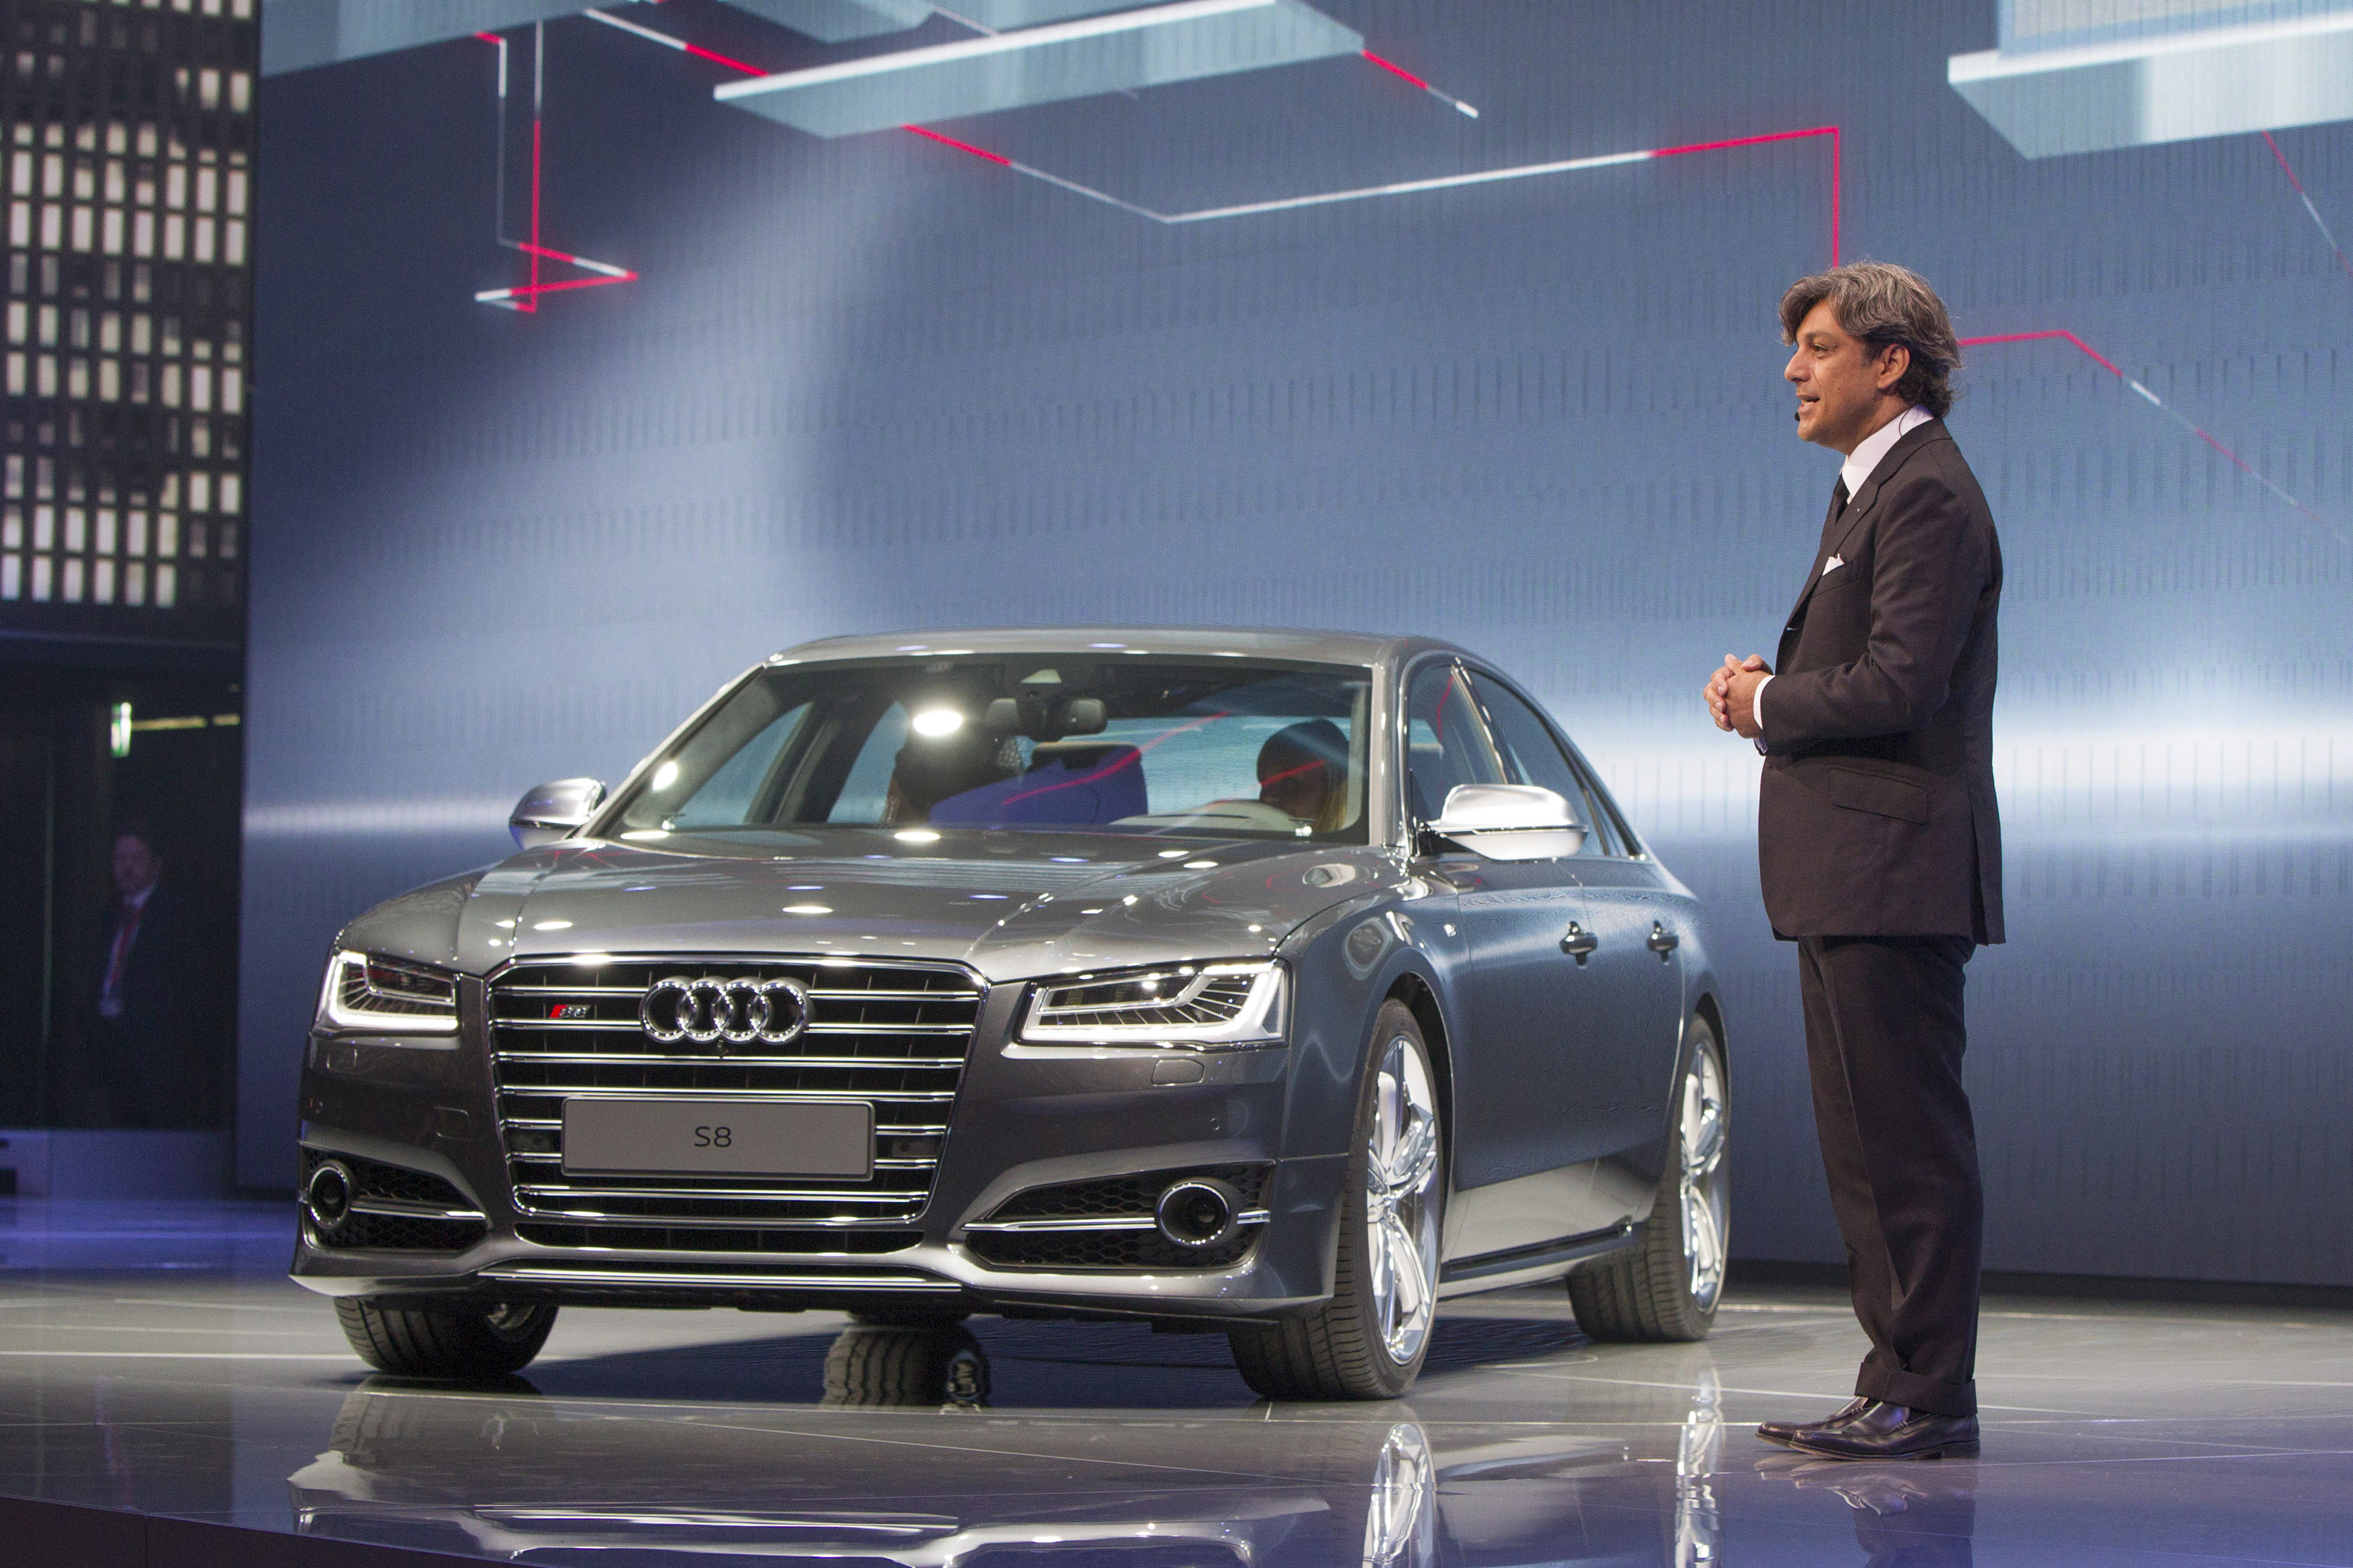 2015 Audi S8 at IAA 2013 (Photo by Audi AG)